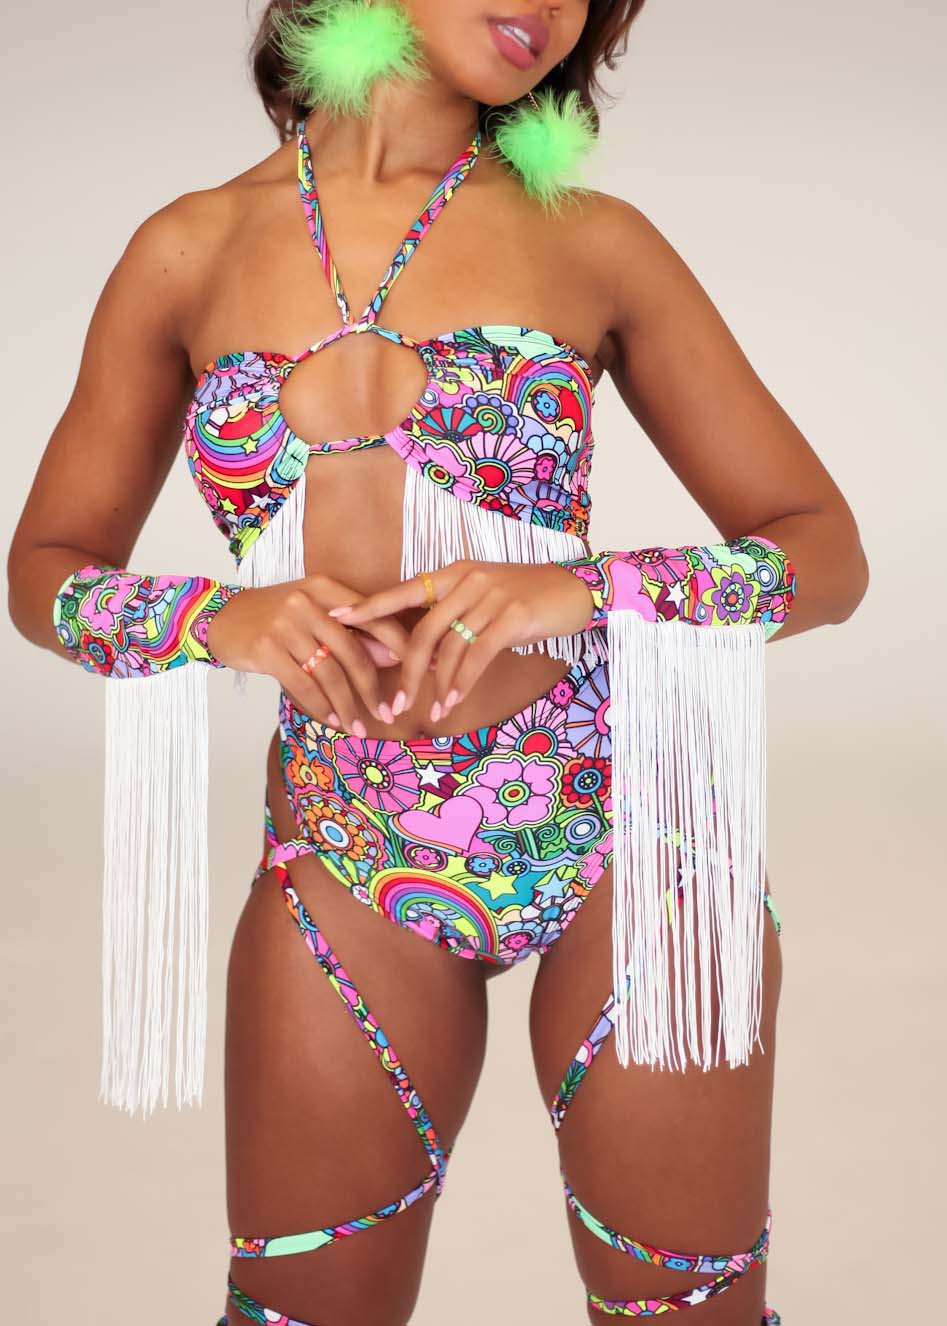 Trippin Daisies Fringe Keyhole Bandeau Top and Trippin Daisies High Cut Bottoms with Leg Ties